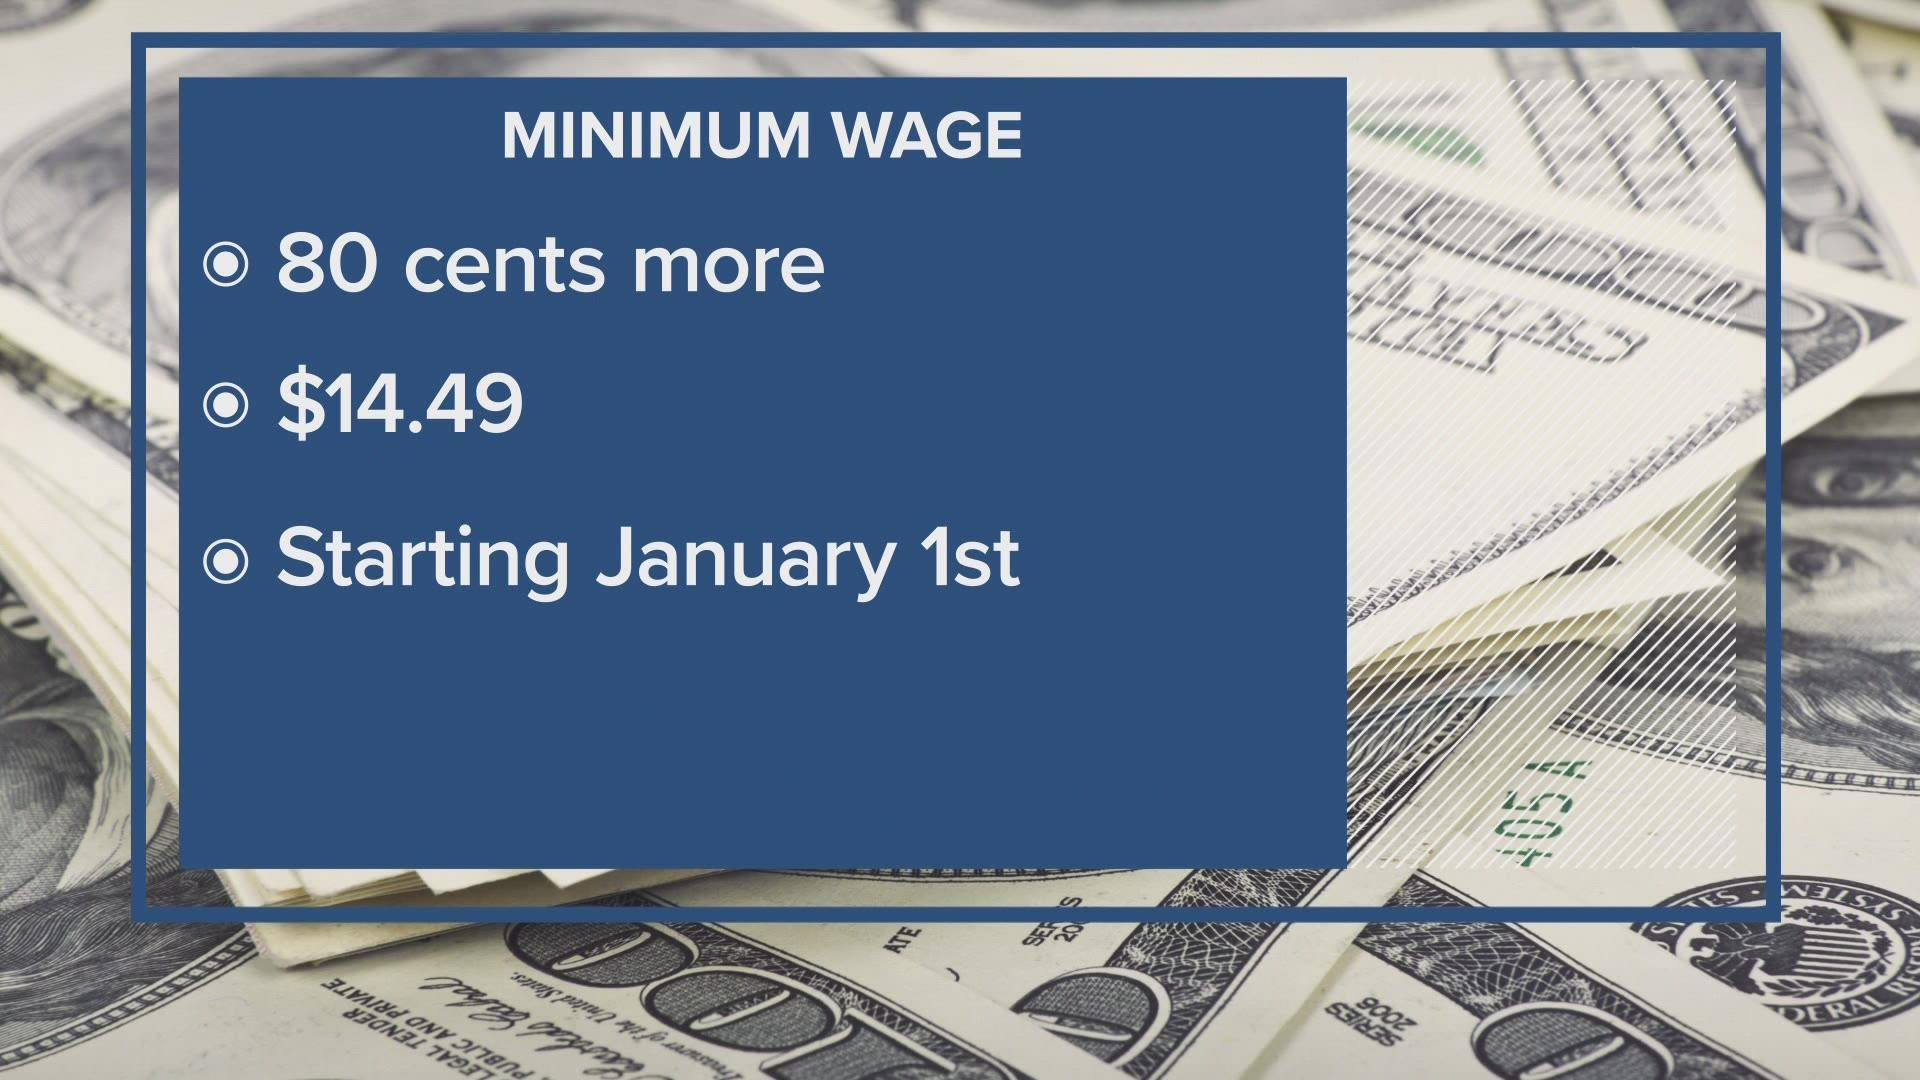 Beginning January 1, 2022, the minimum wage in Washington will rise to $14.49 an hour